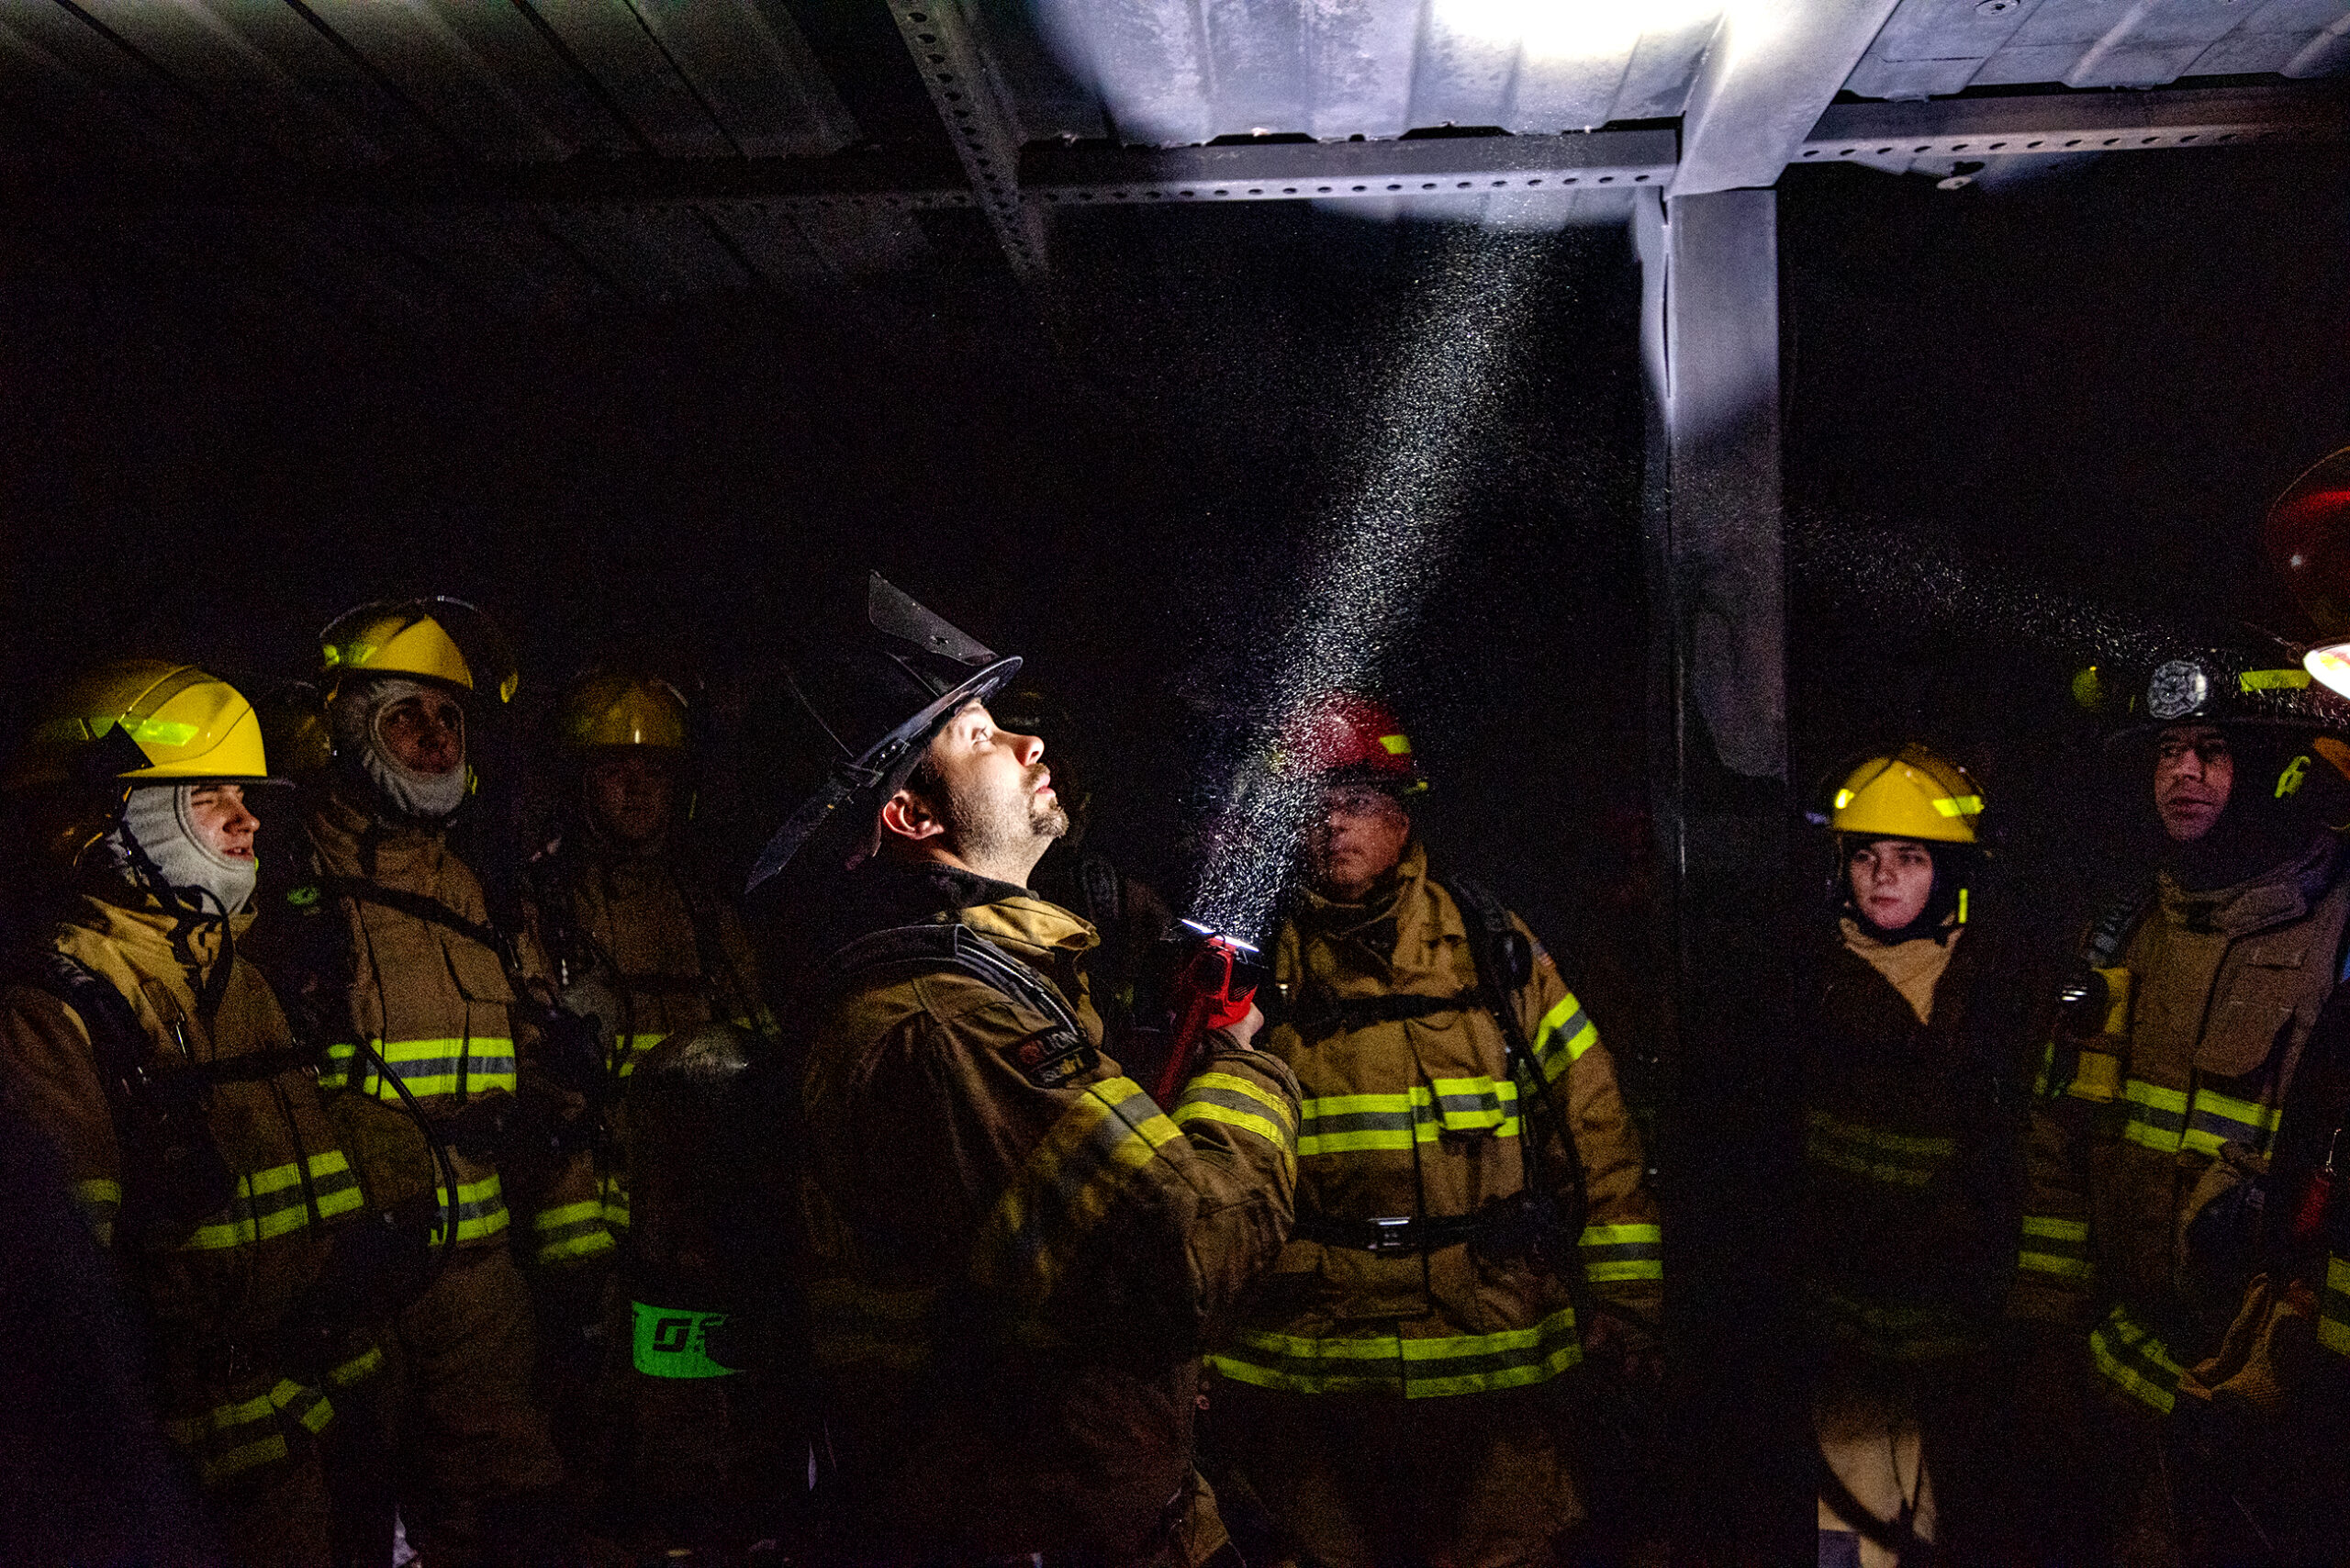 A man in a firefighter uniform shines a flashlight into a dark room as students gather around.